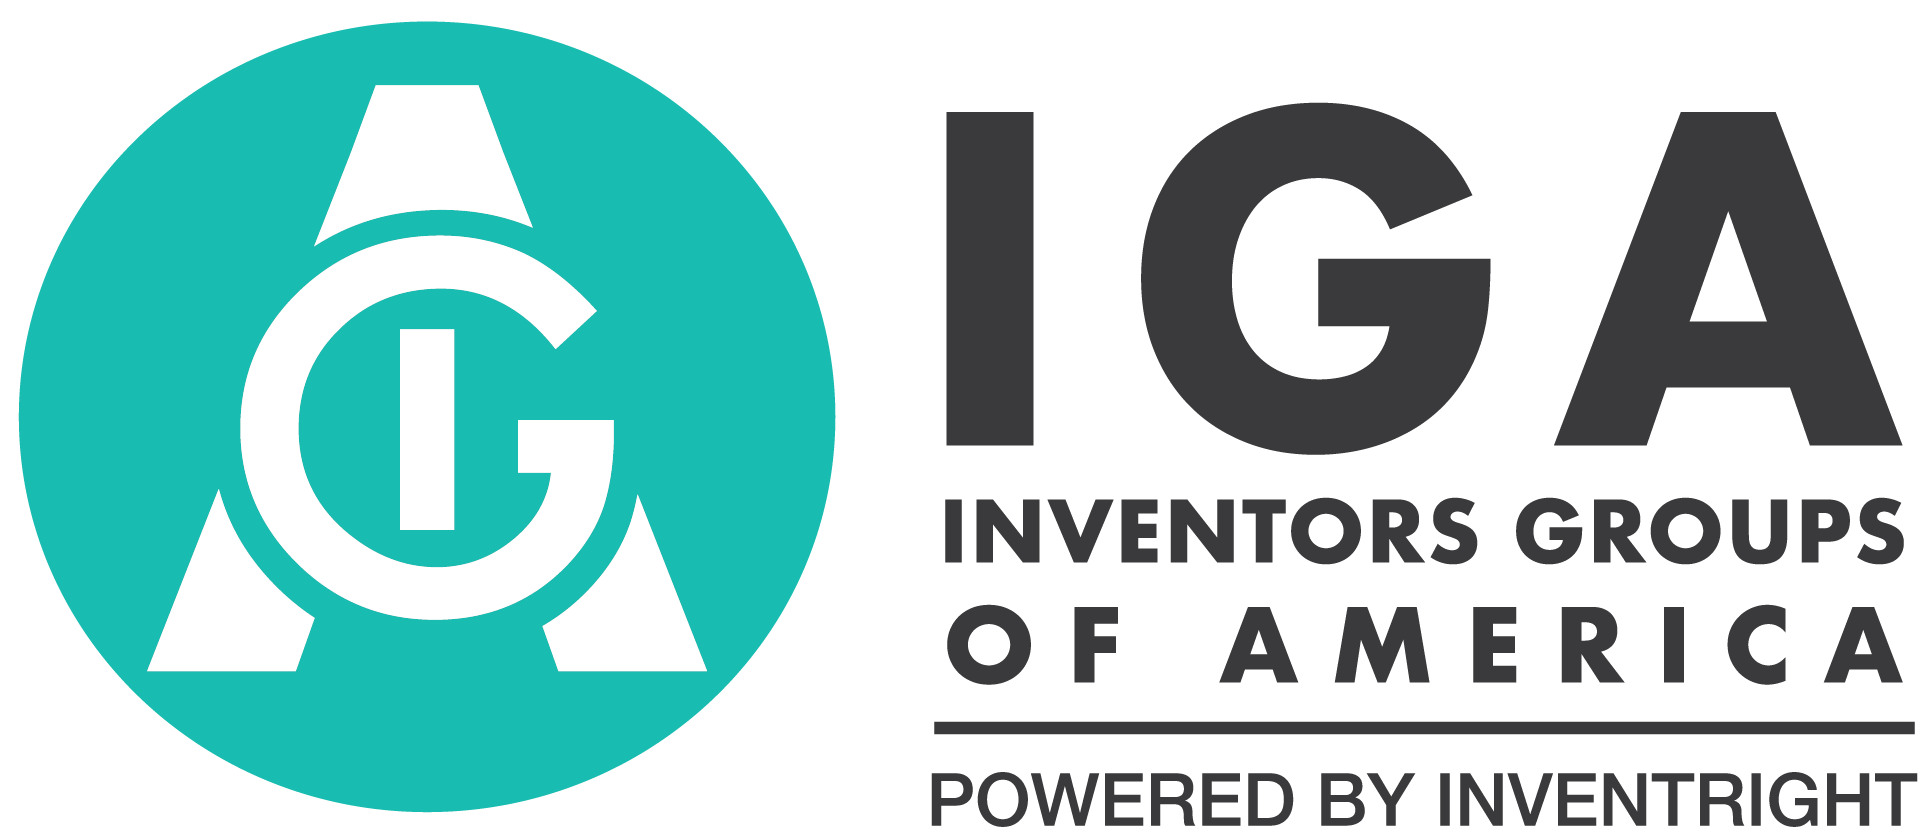 IGA Powered by InventRight